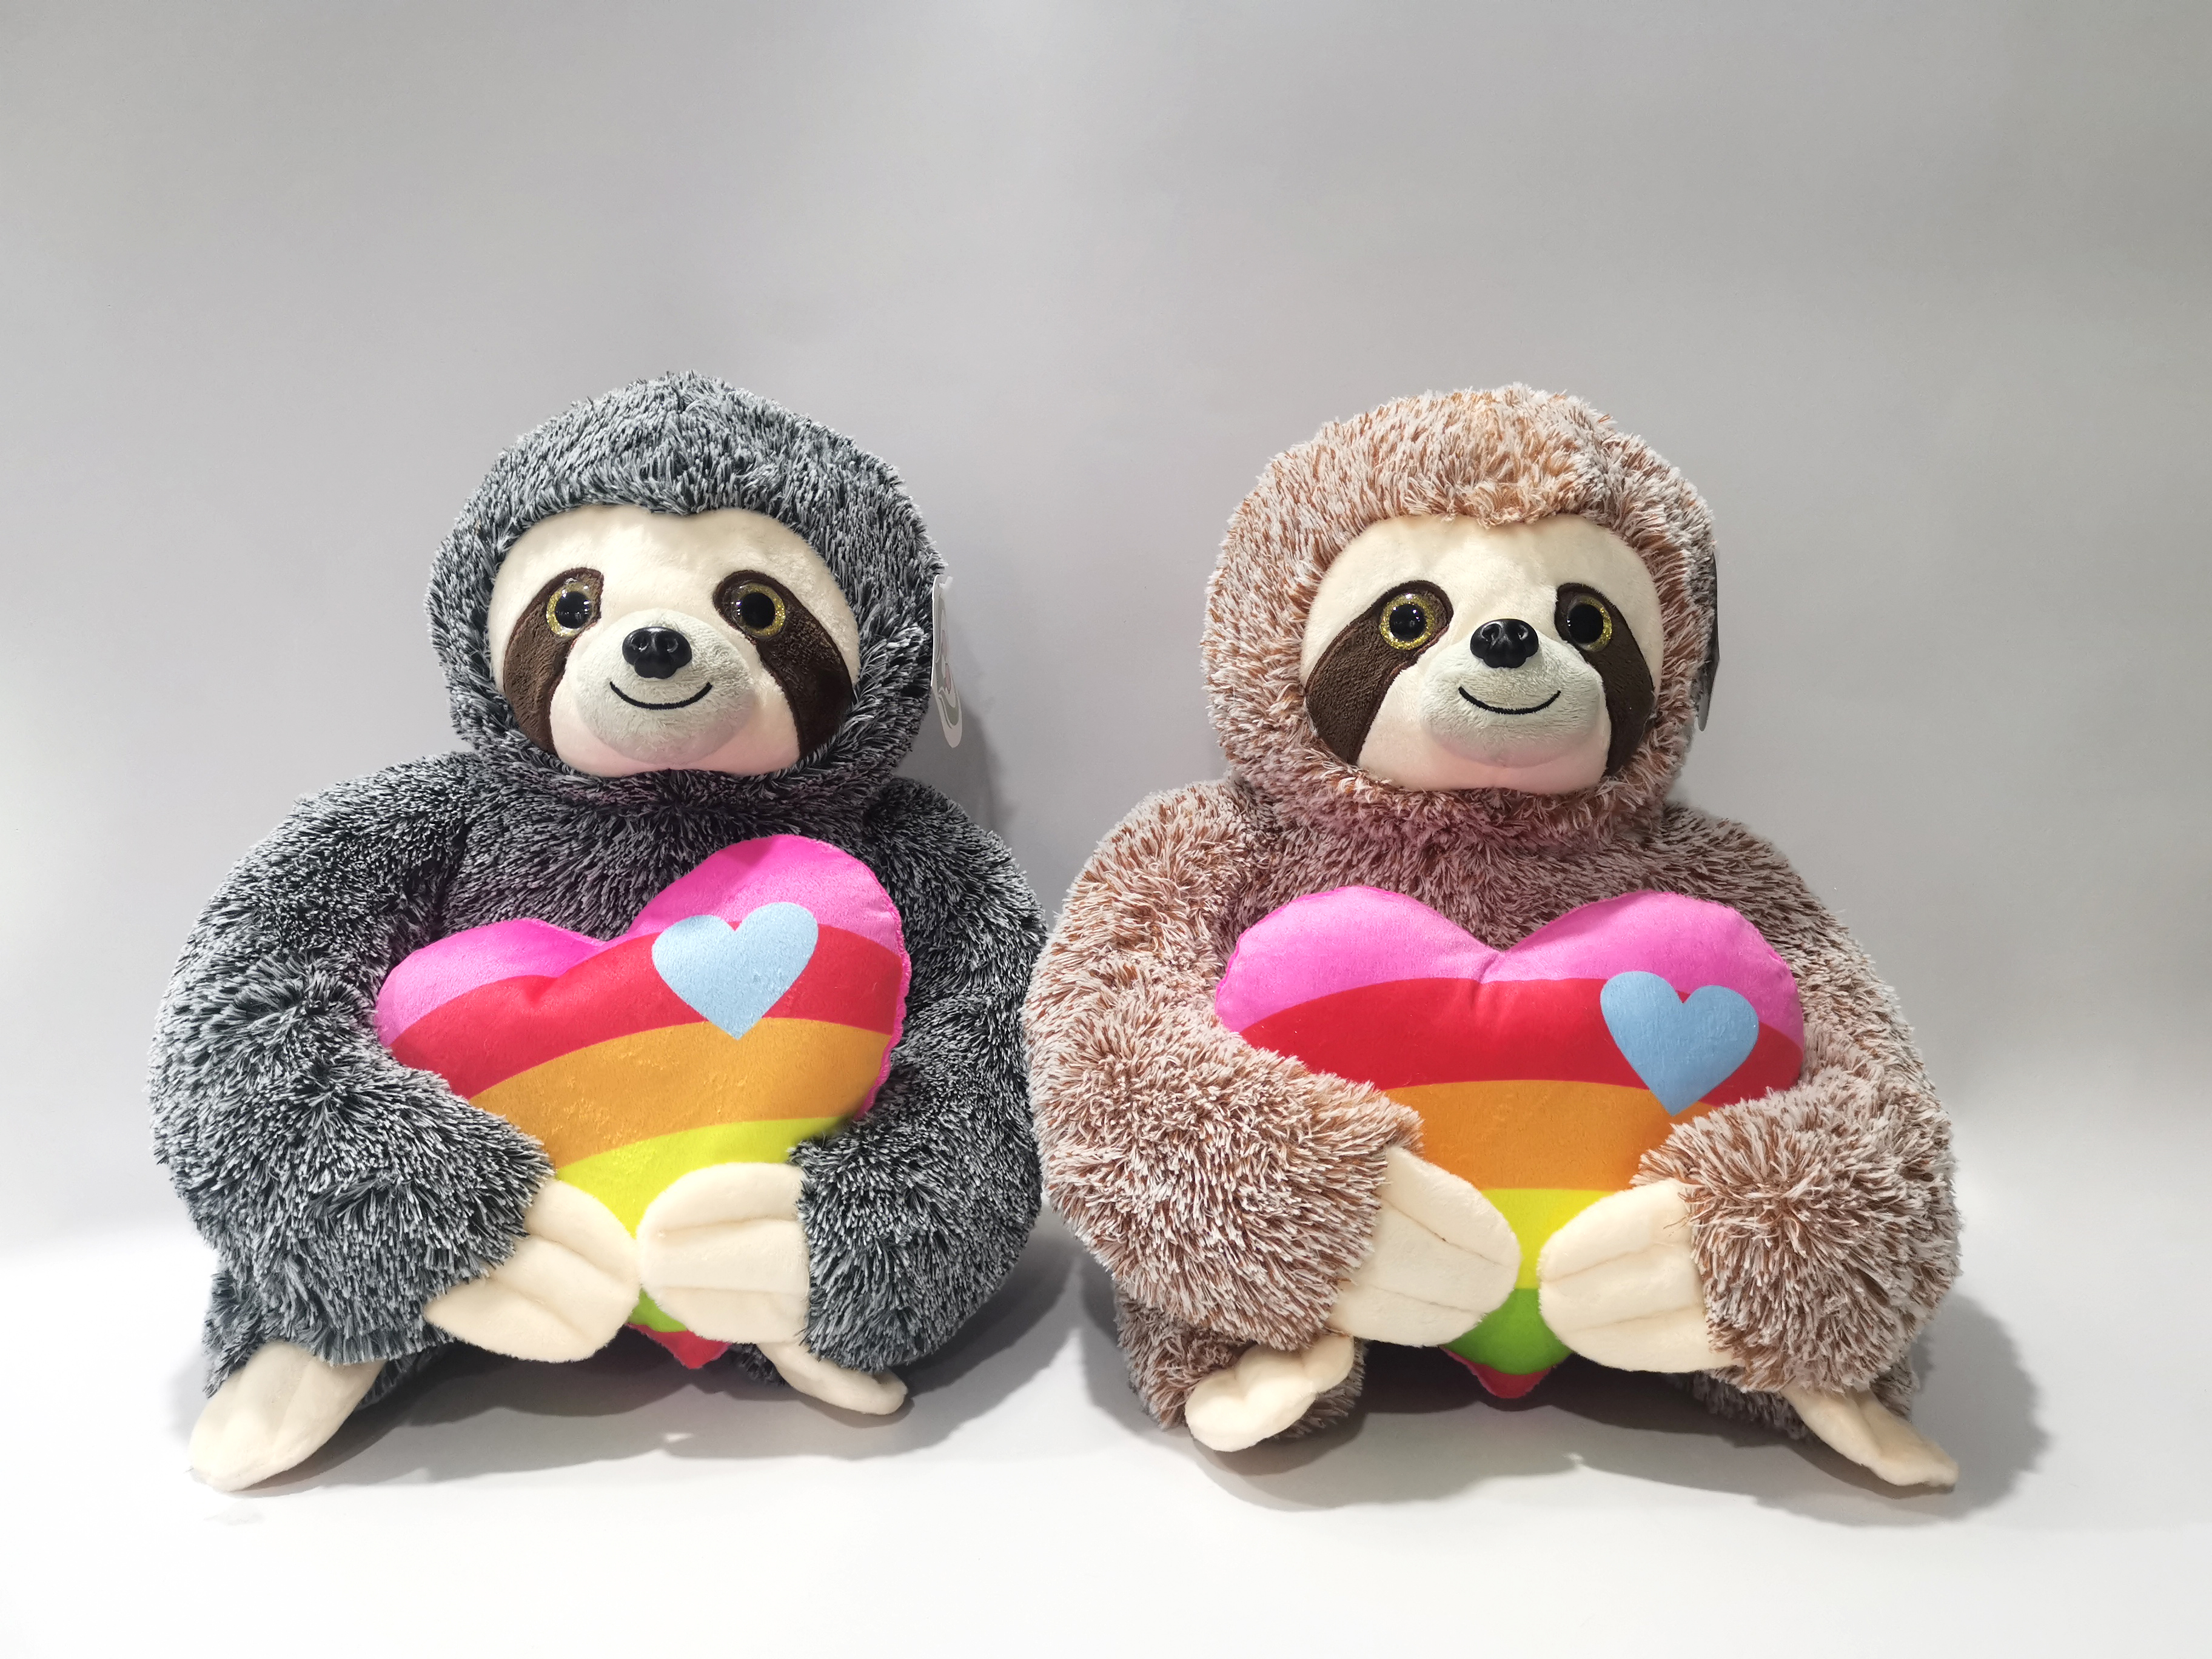 2019 Valentine Plush Toys: 2 asst Slothes with heart 